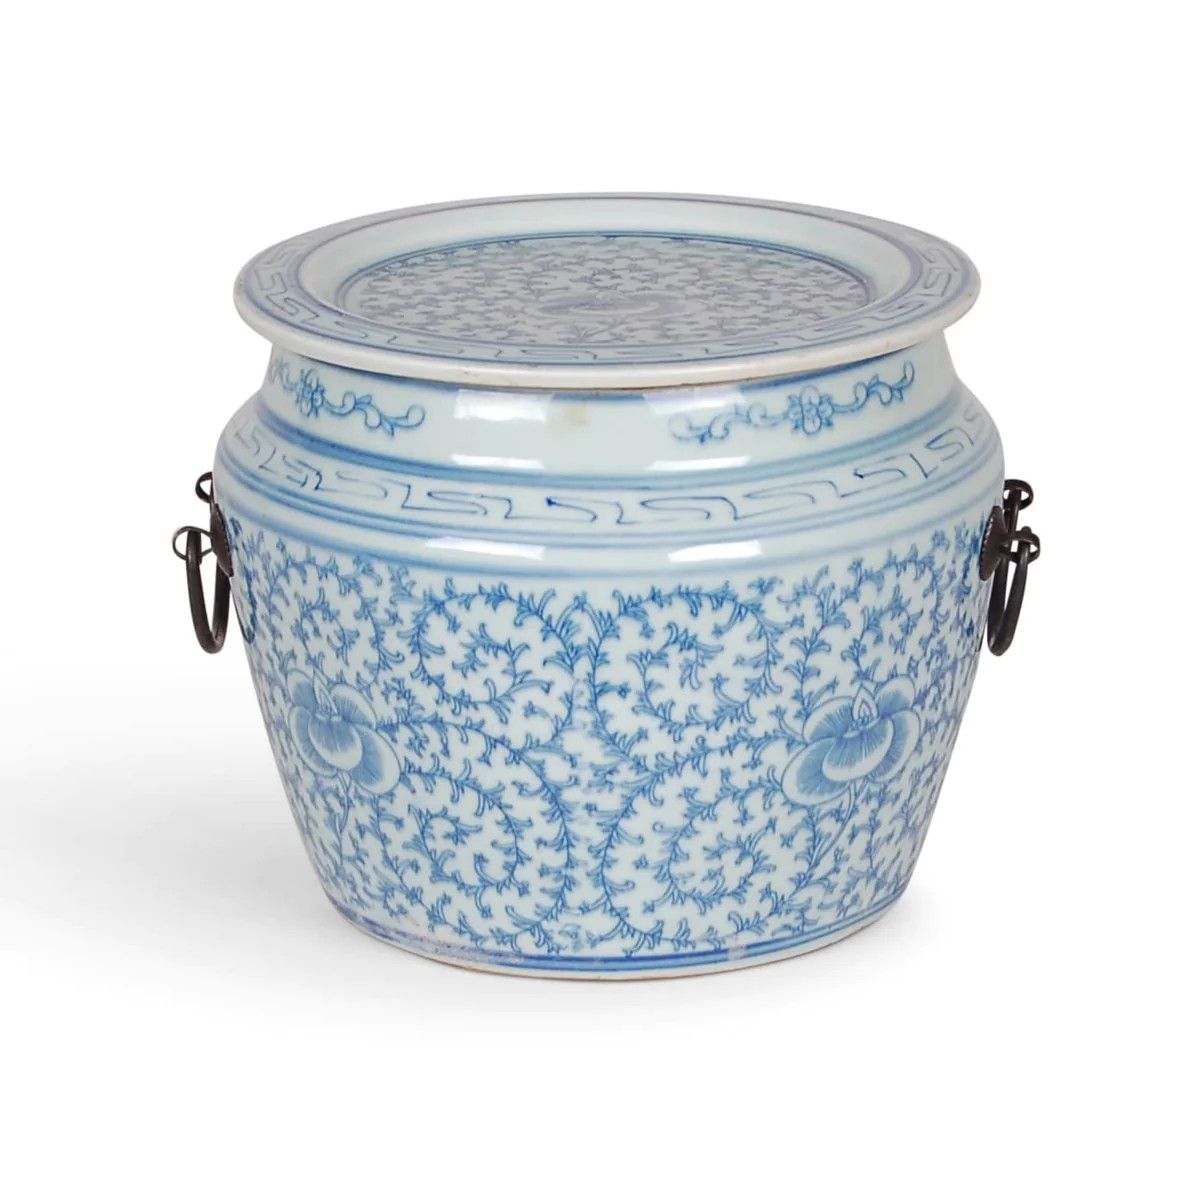 7" Porcelain Blue & White Floral Flat Lidded Jar | The Well Appointed House, LLC